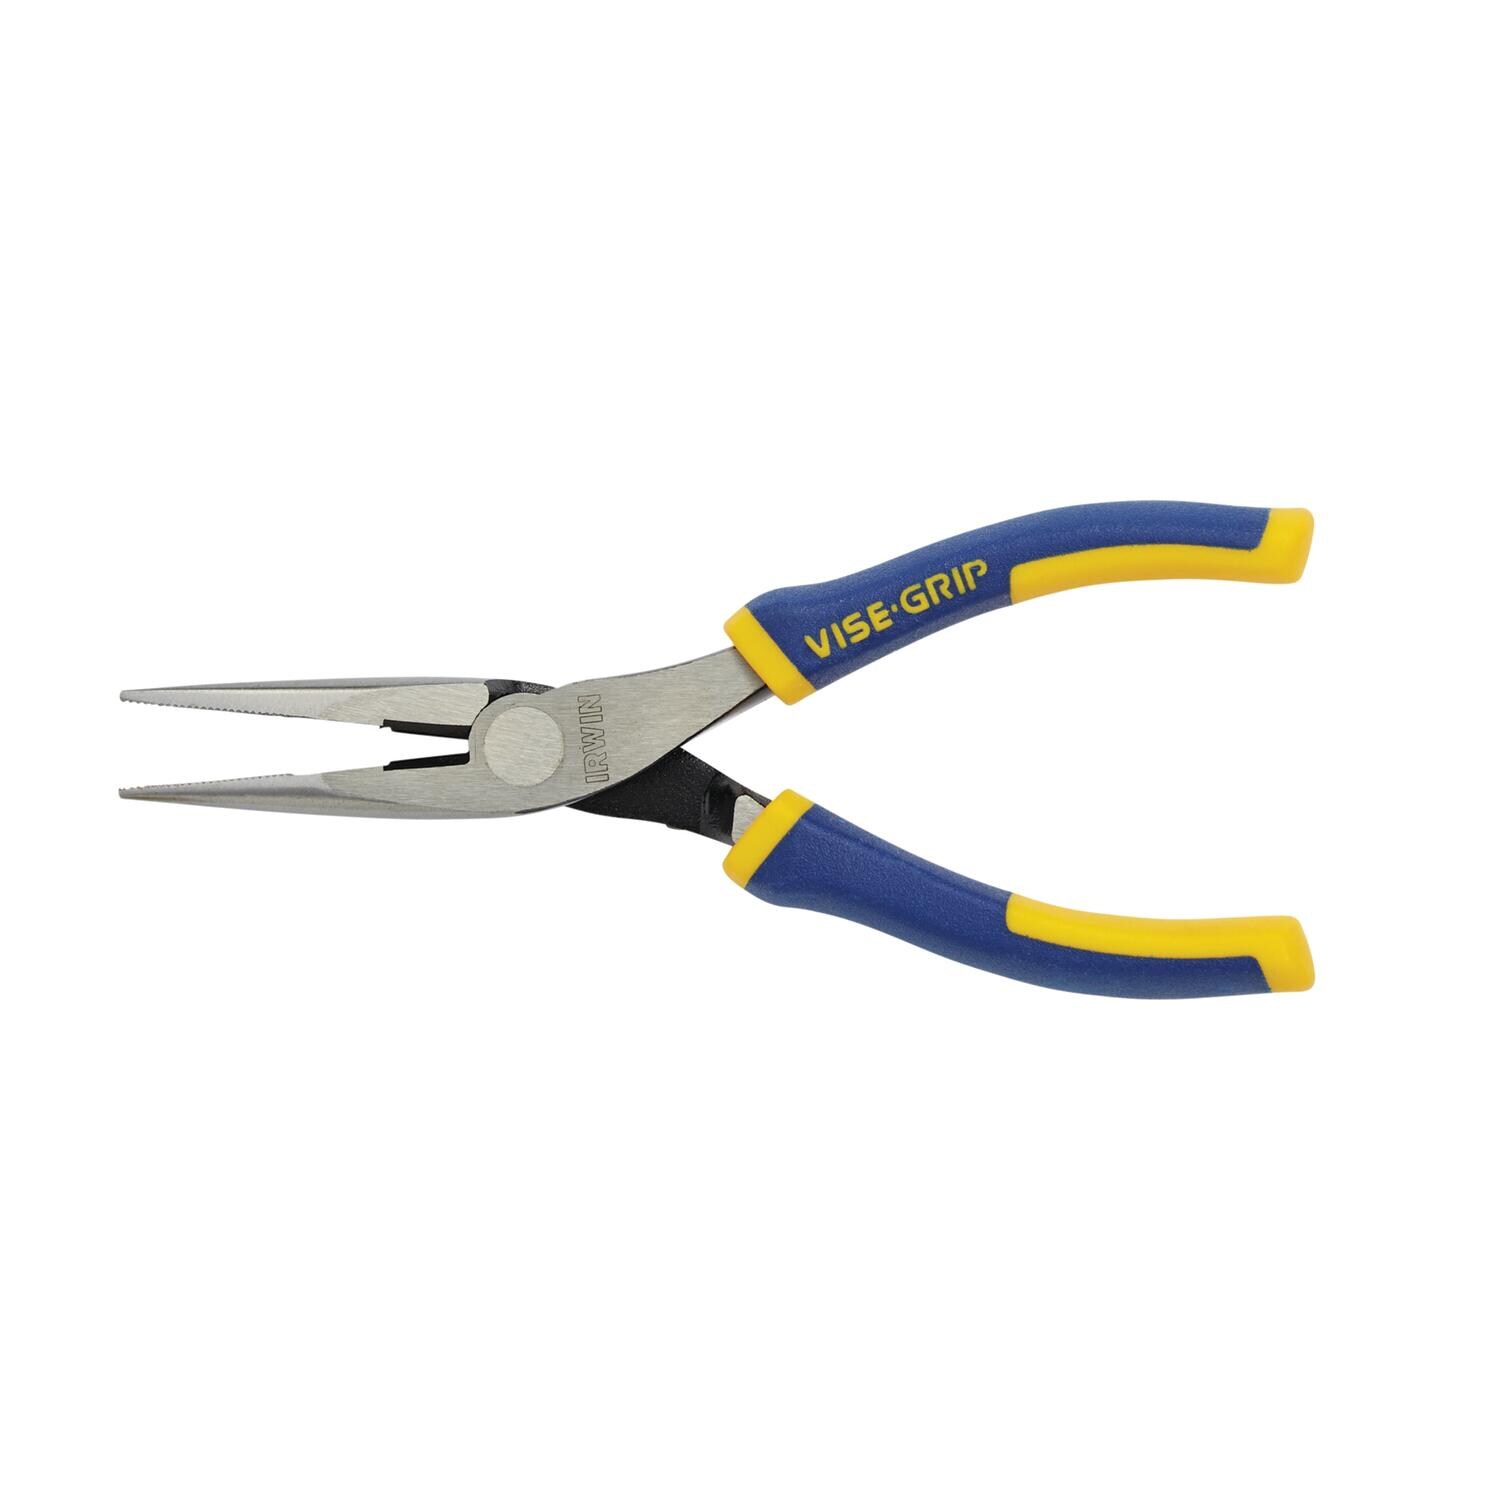 IRWIN VISE-GRIP Long Nose Pliers New version 6-Inch 2078216 